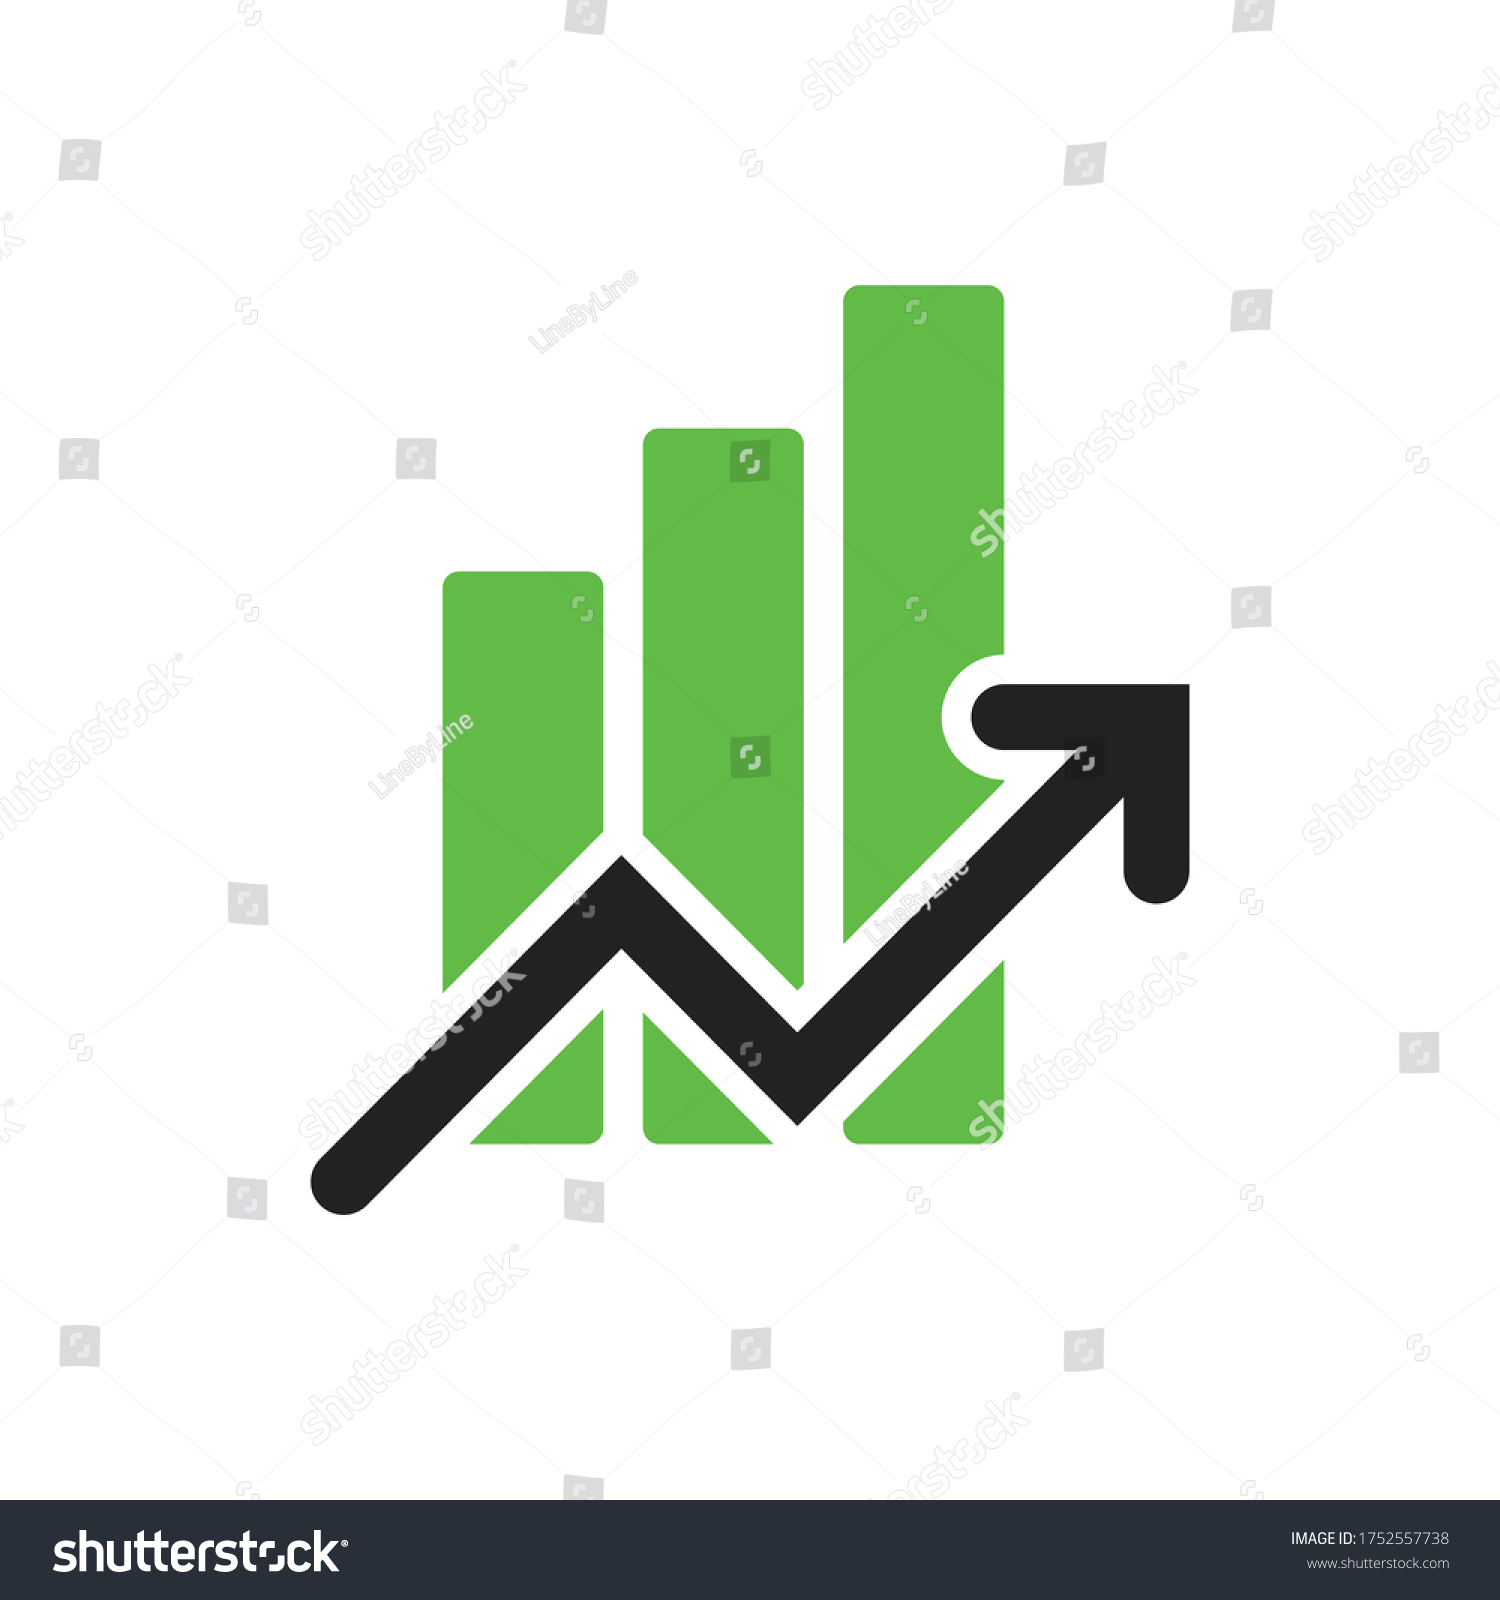 SVG of Stock Market, Stock Market Exchange, Recession, Economy, Buy The Dip, Money Sign Arrow Bar Graph Icon Vector Illustration Background svg